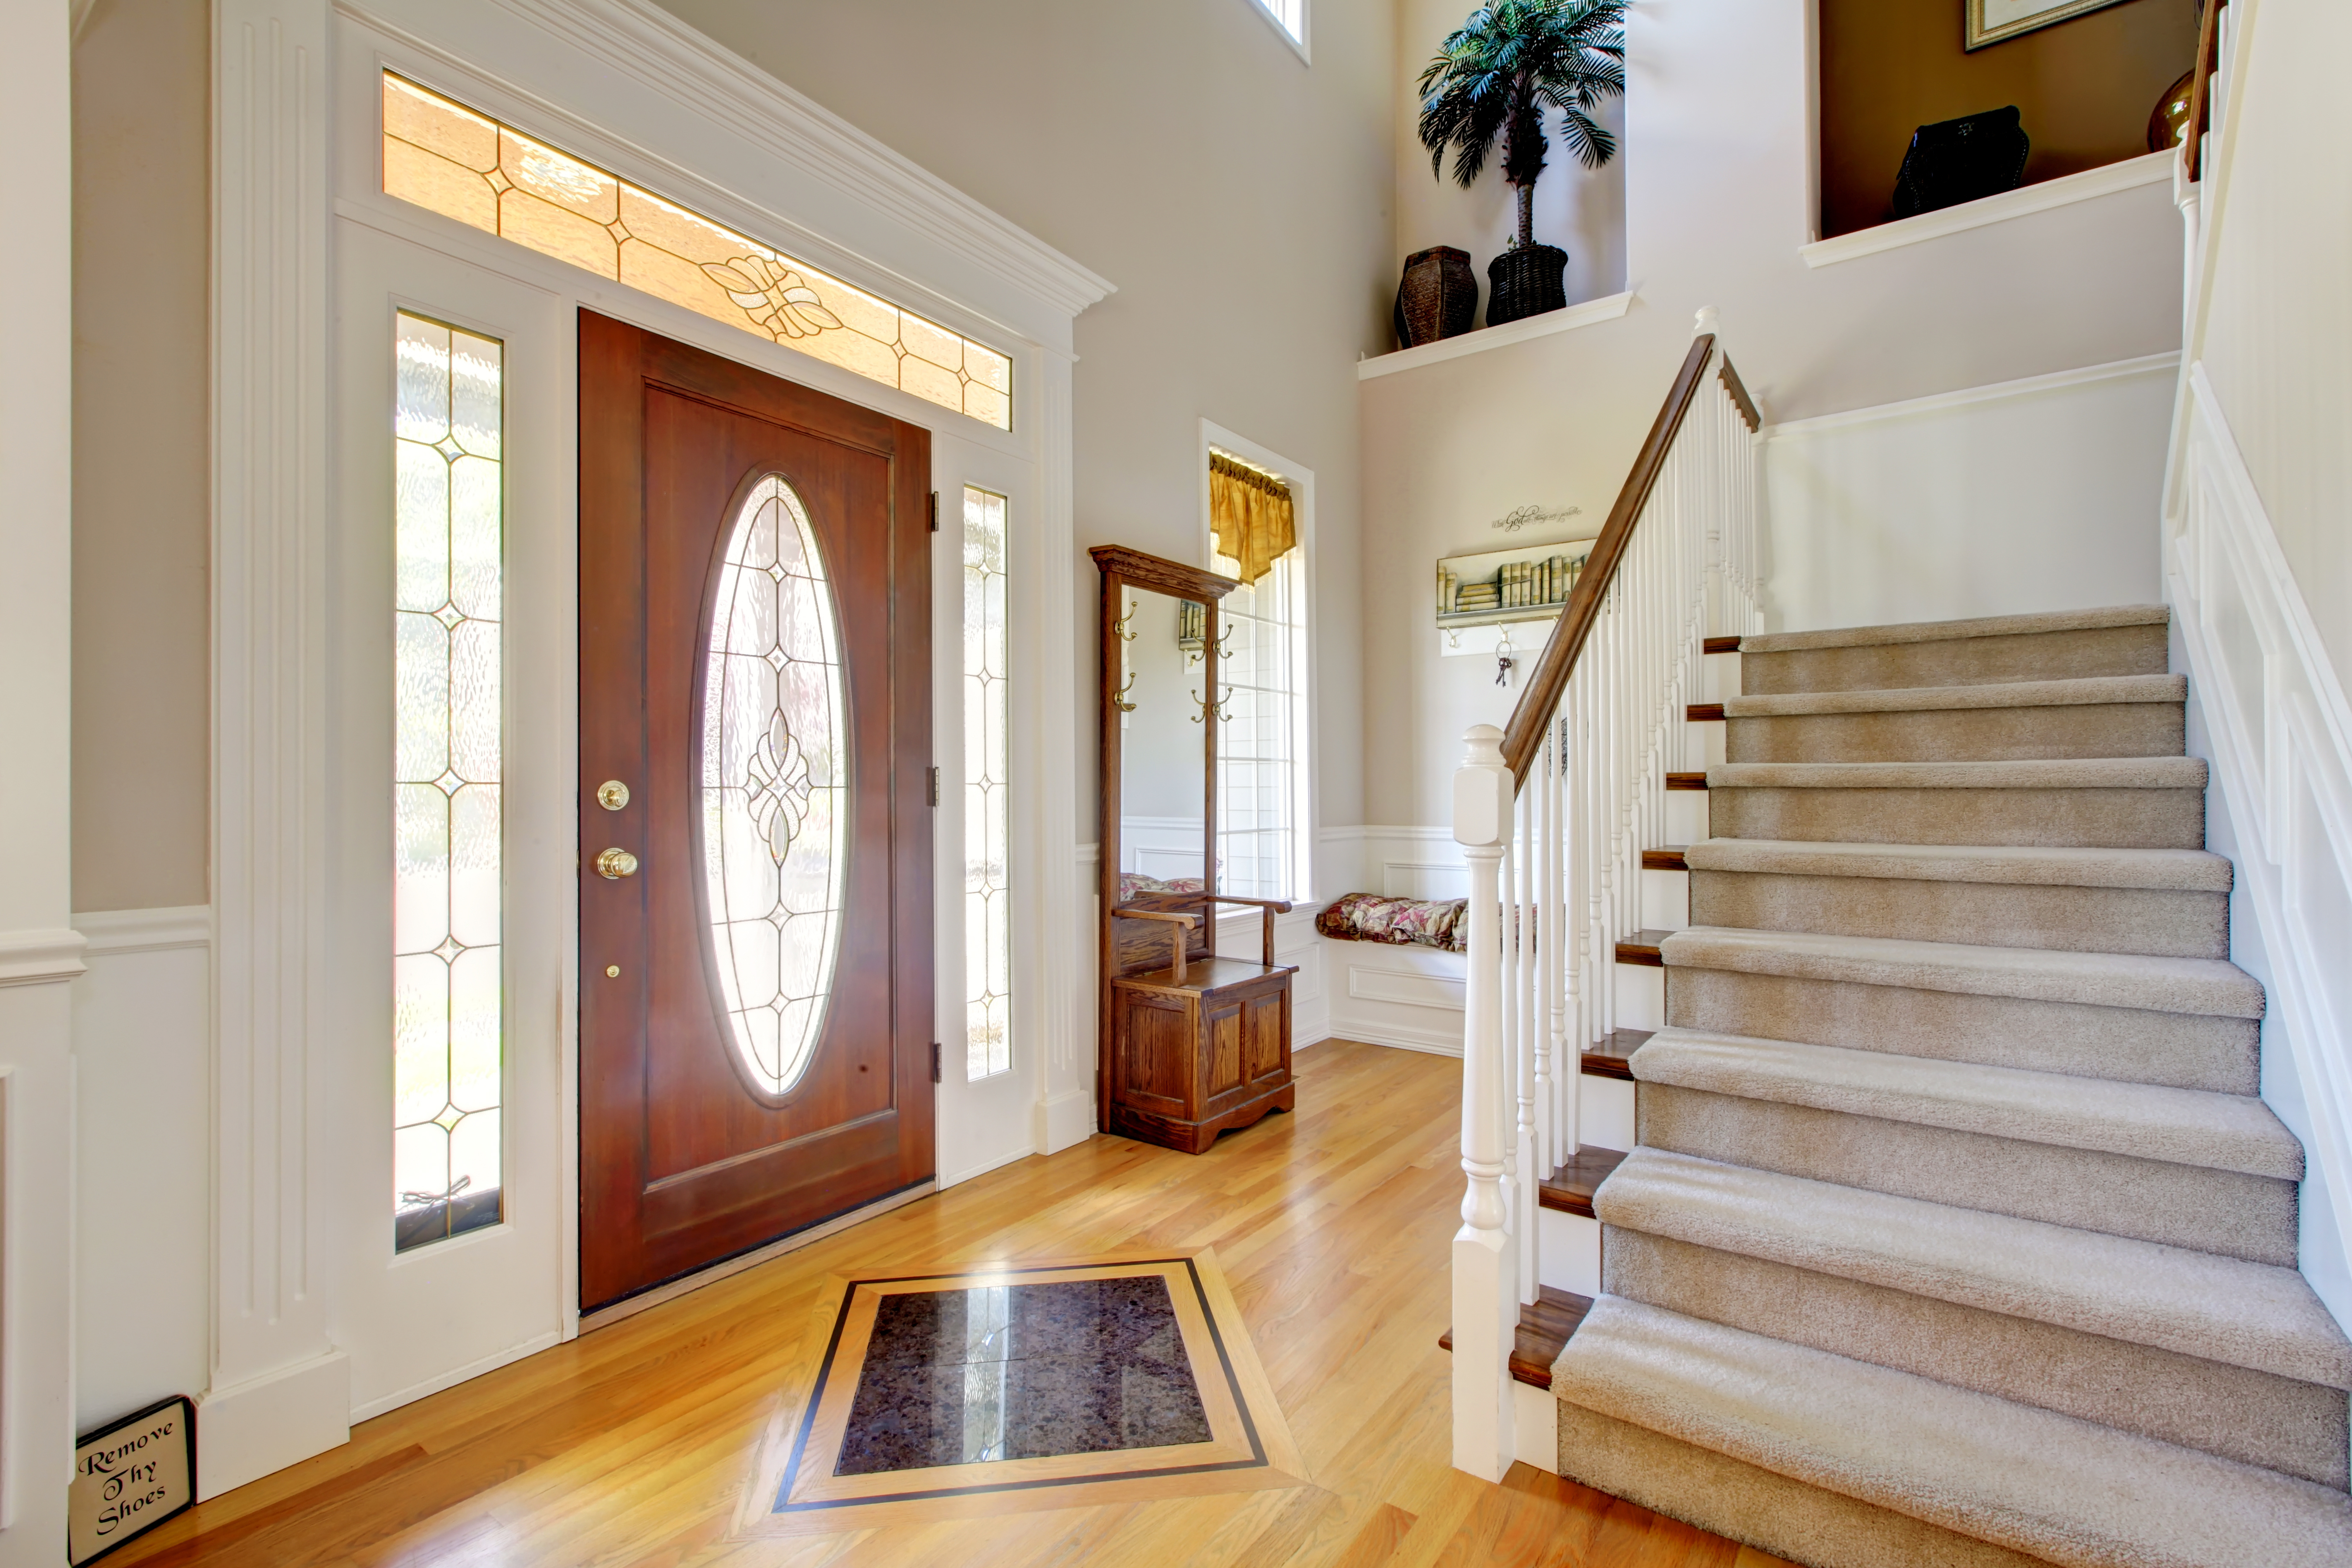 Inside the front entrance of a home to locate 